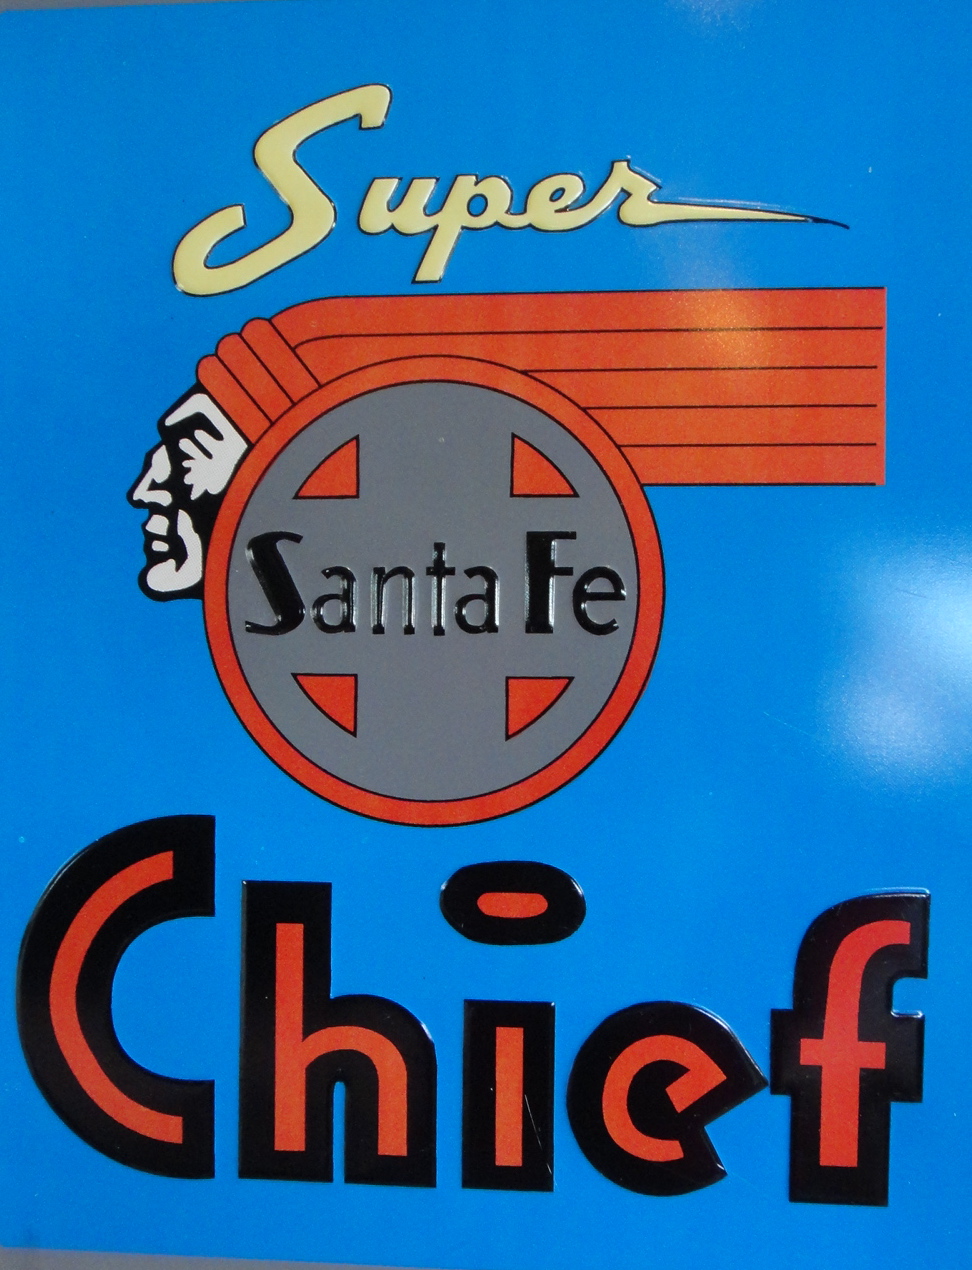 Fun with old signs, Super Santa Fe Chief